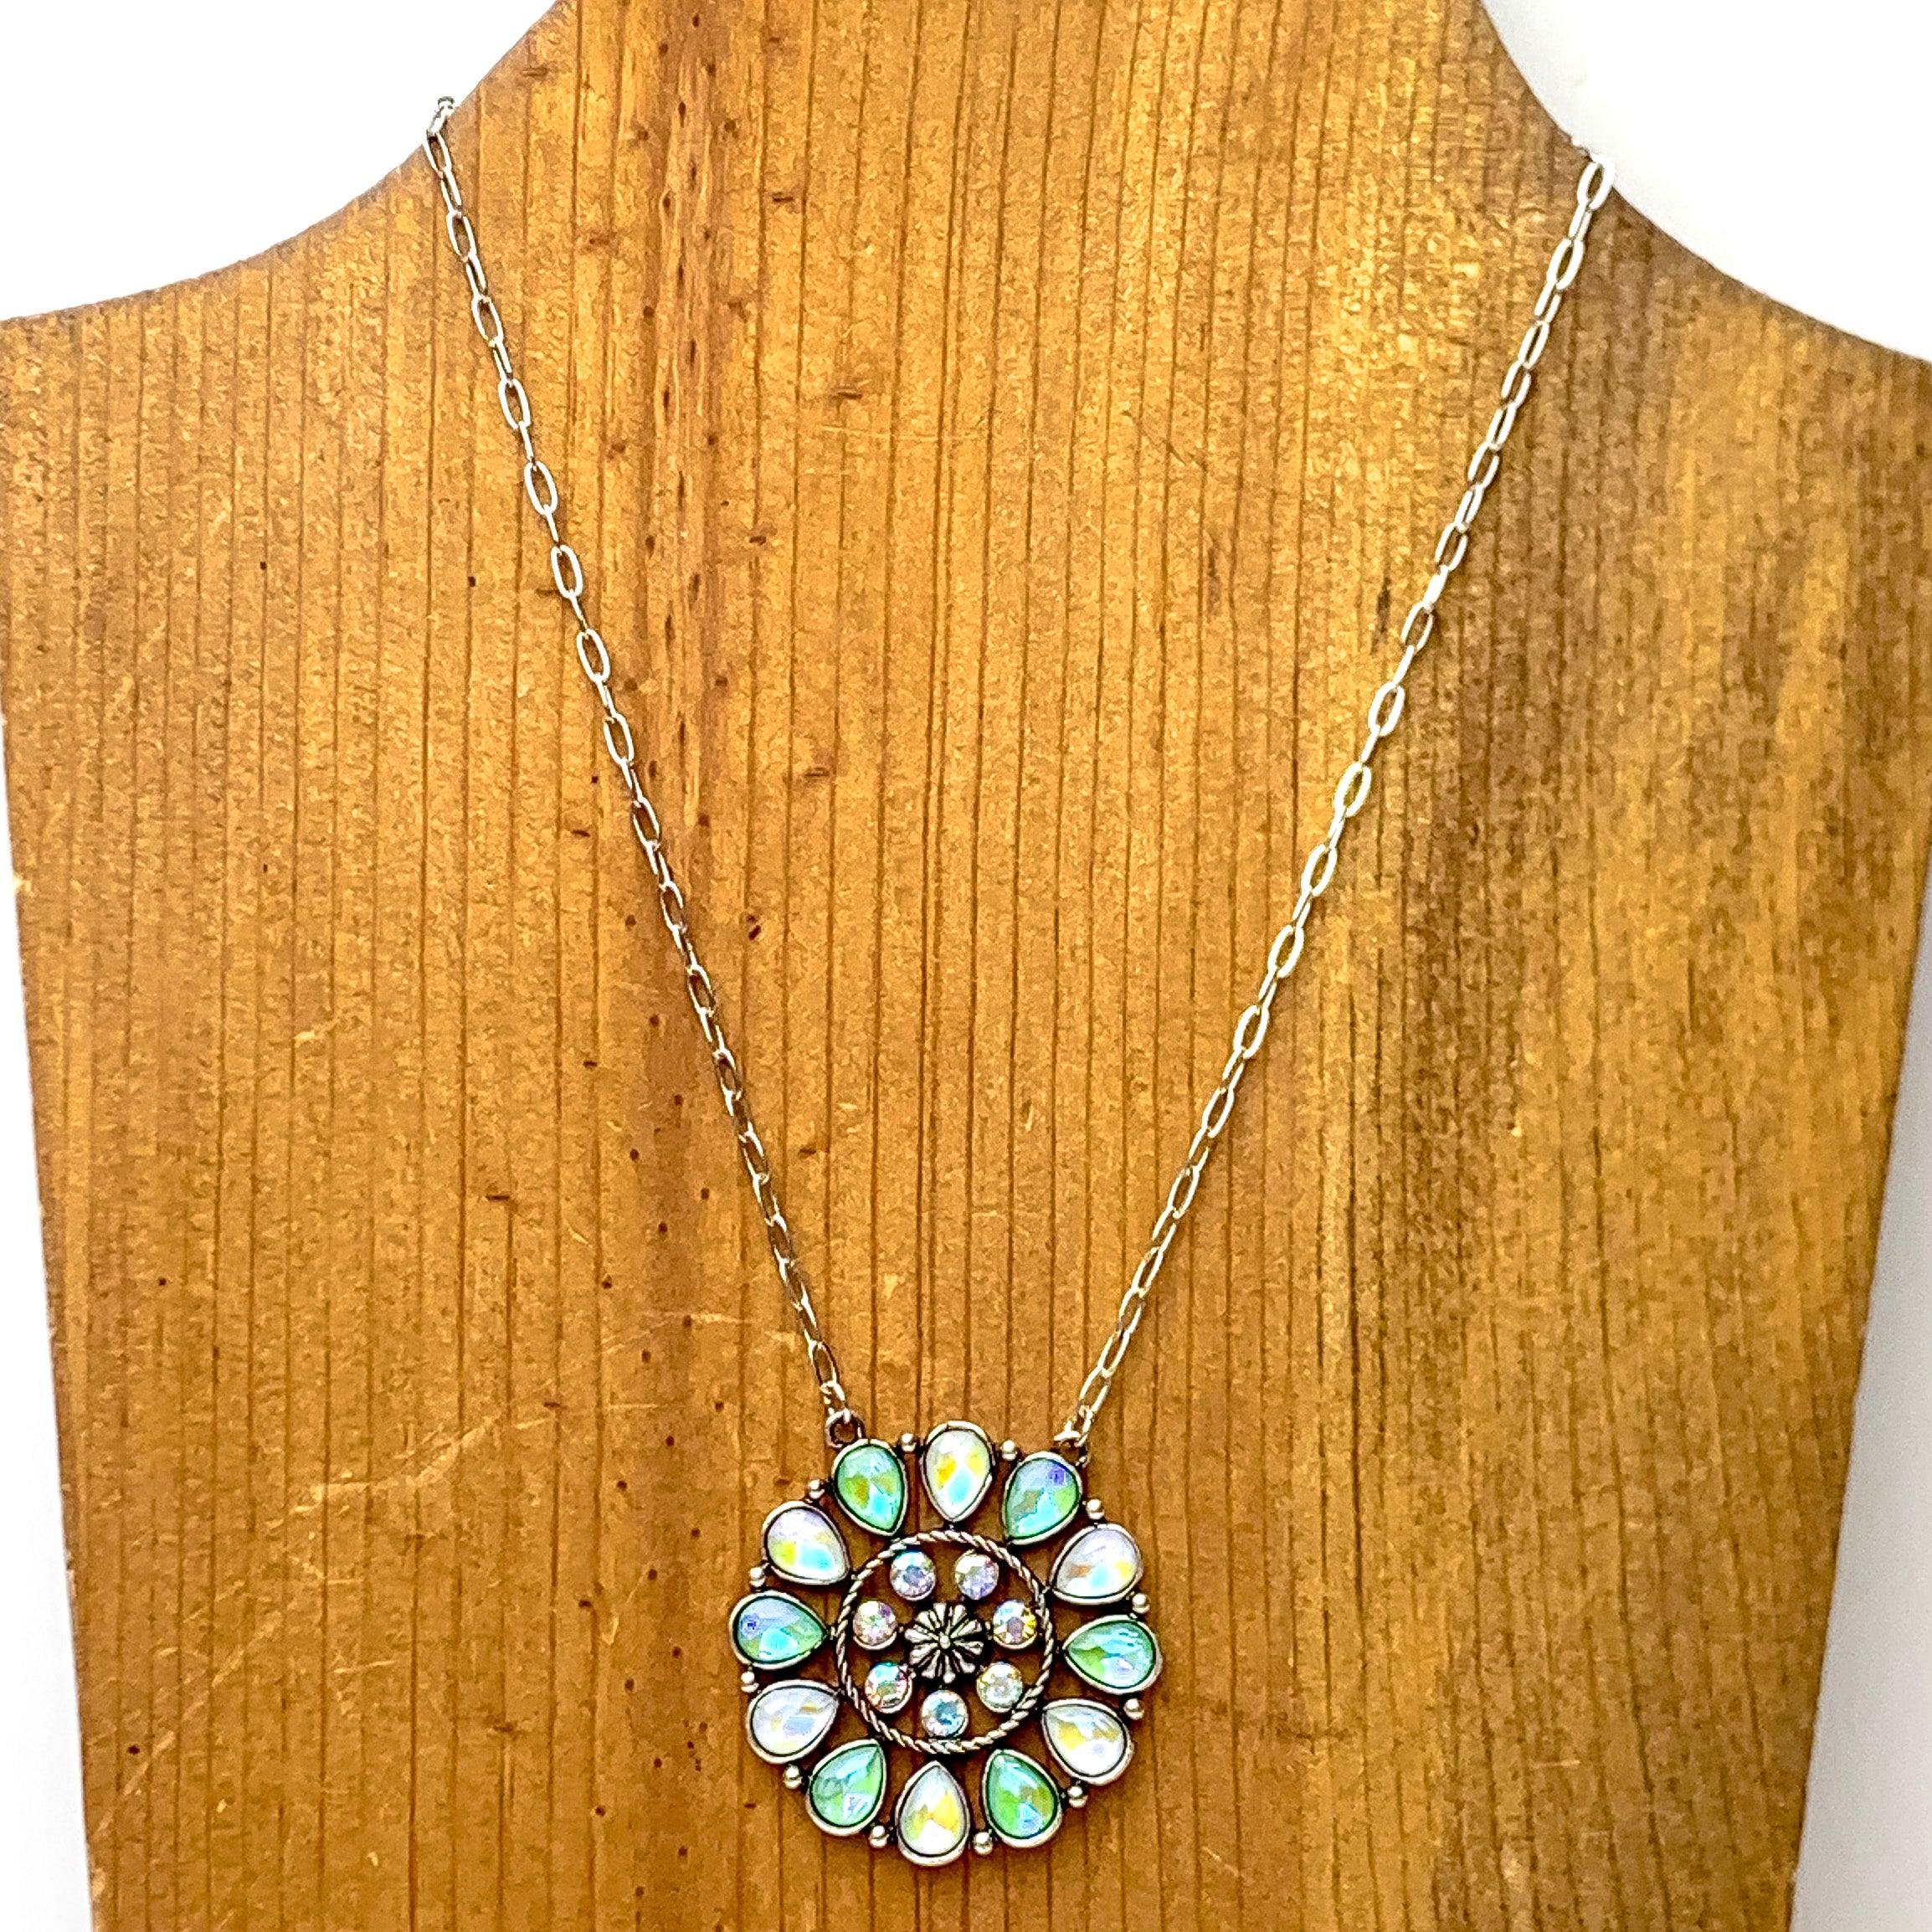 Desert Daisy Silver Tone Flower Concho Necklace in Green and Ivory - Giddy Up Glamour Boutique